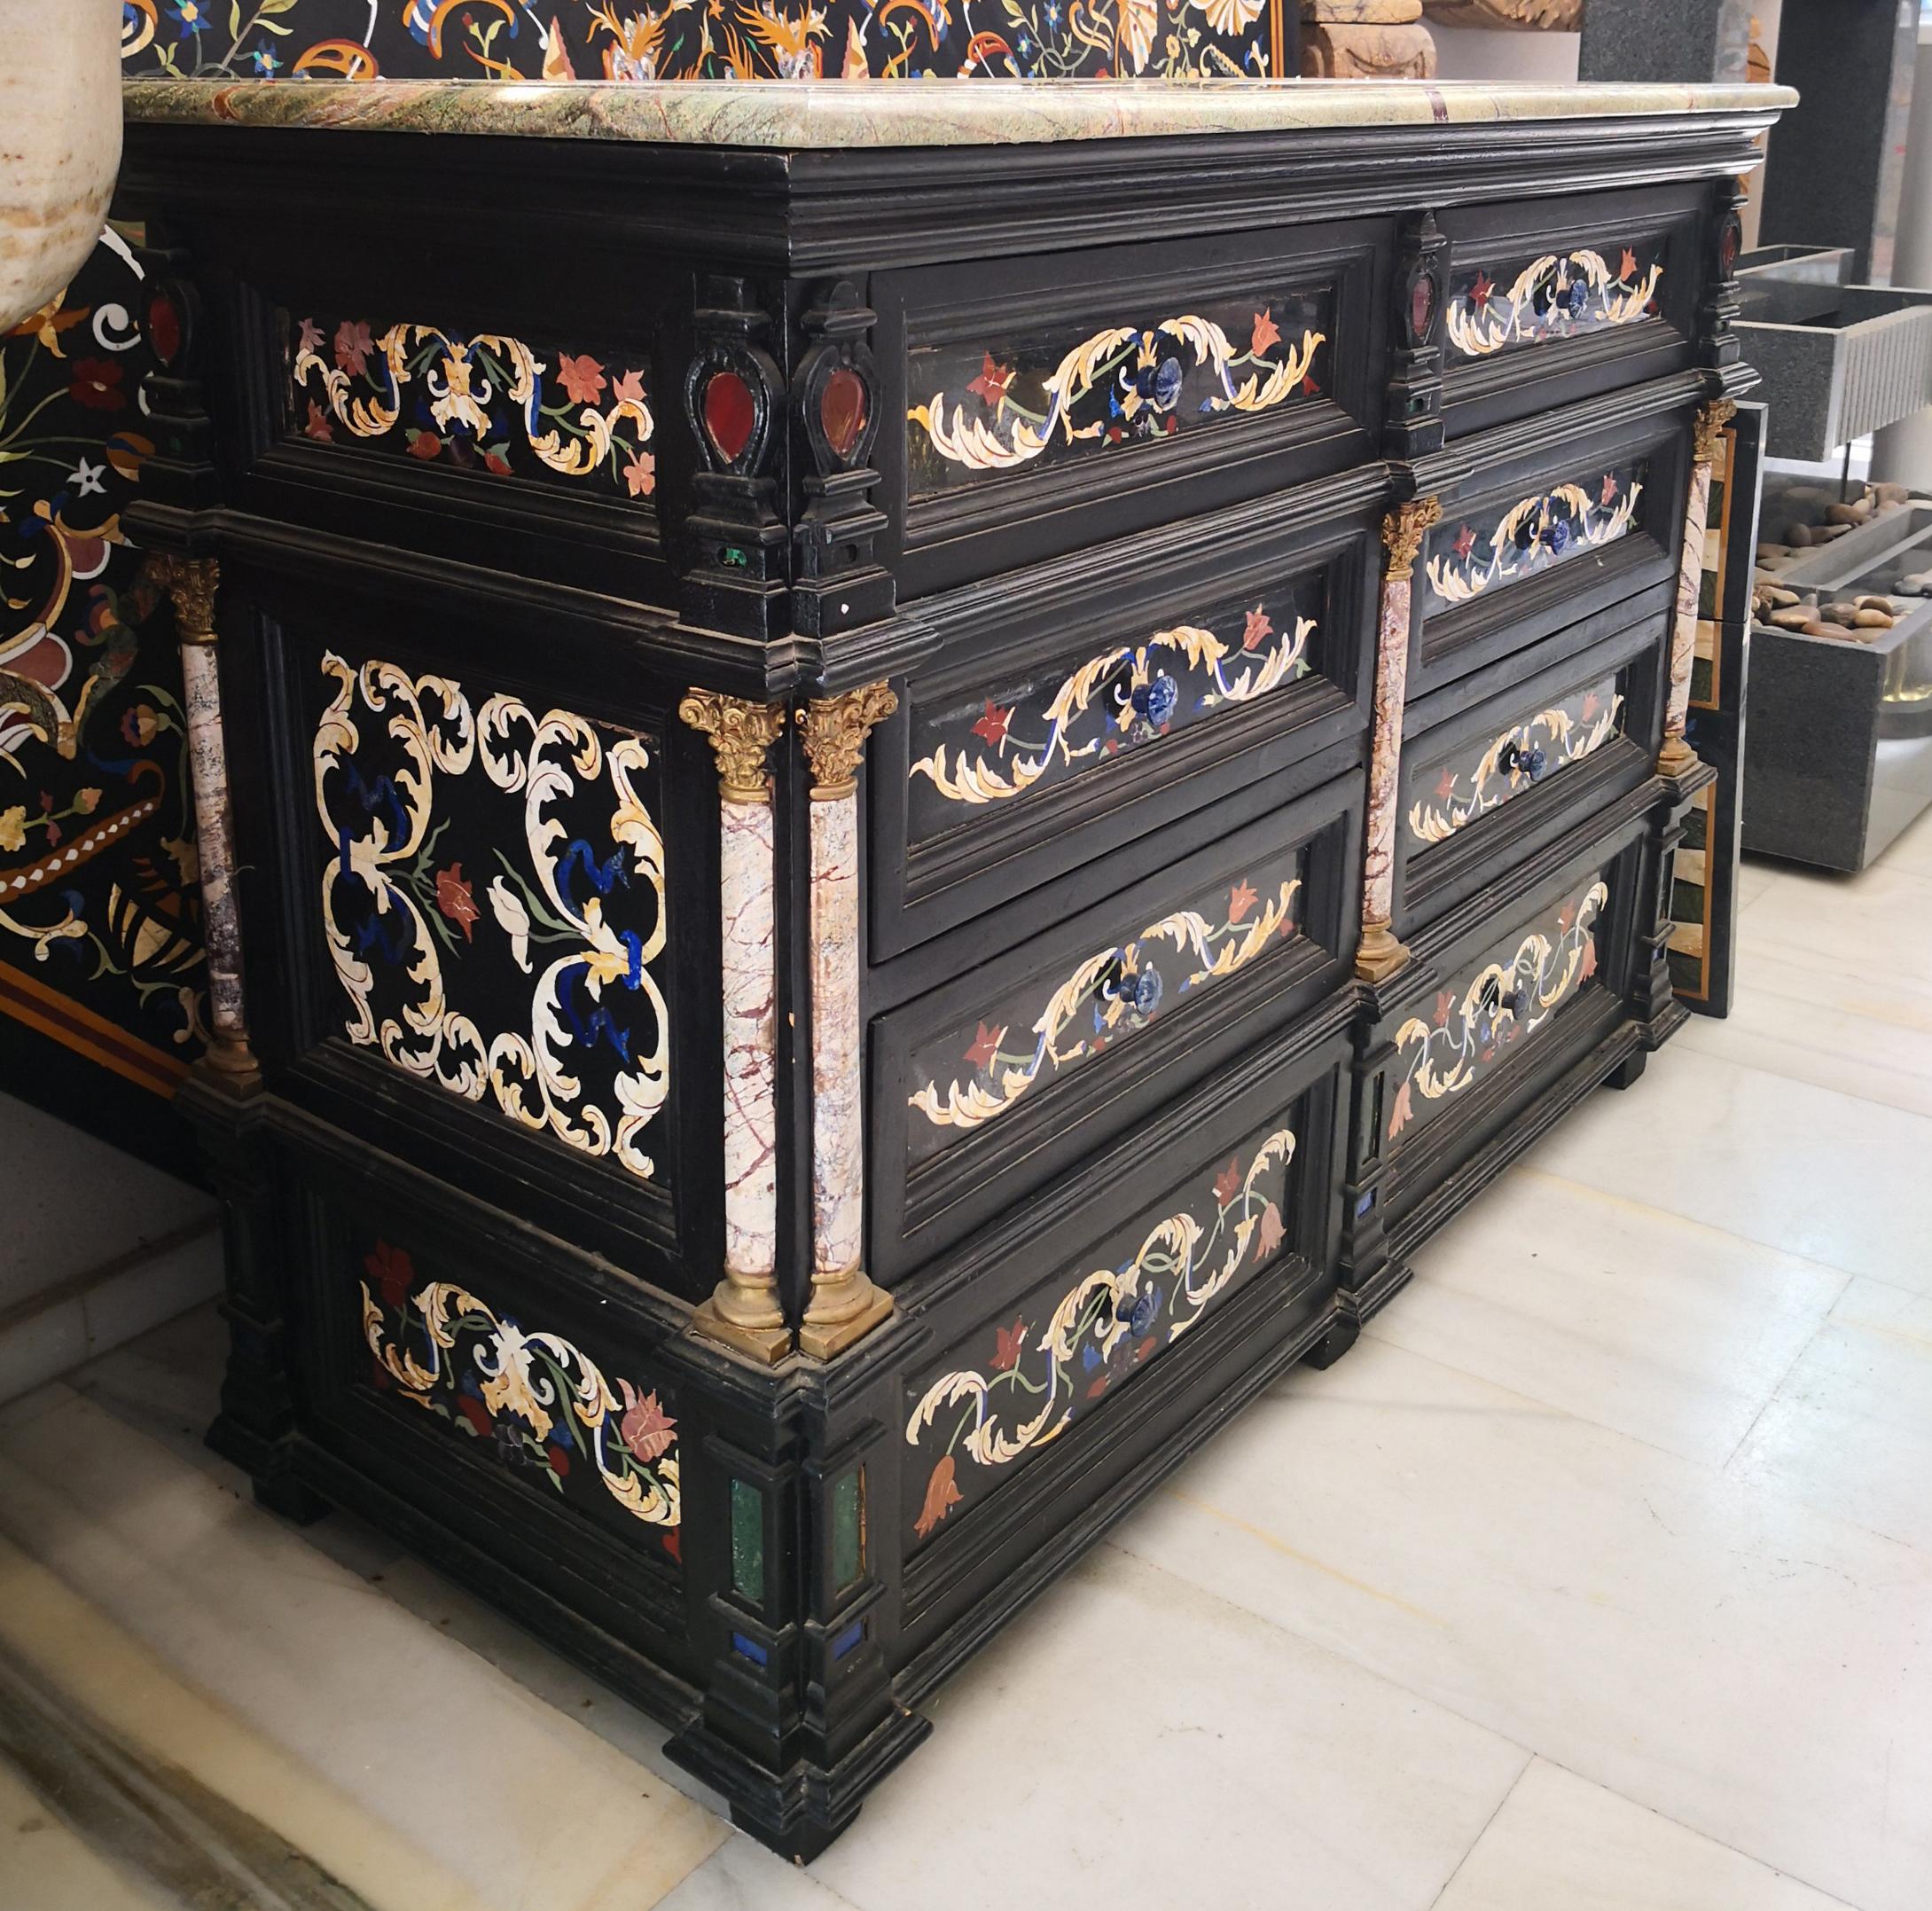 Palatial chest of drawers fully decorated by Italian craftsmanship using traditional pietre-dure hardstones inlay mosaics and brass accent pieces, mainly the pilasters base and capital. Forest-green marble tabletop. 

